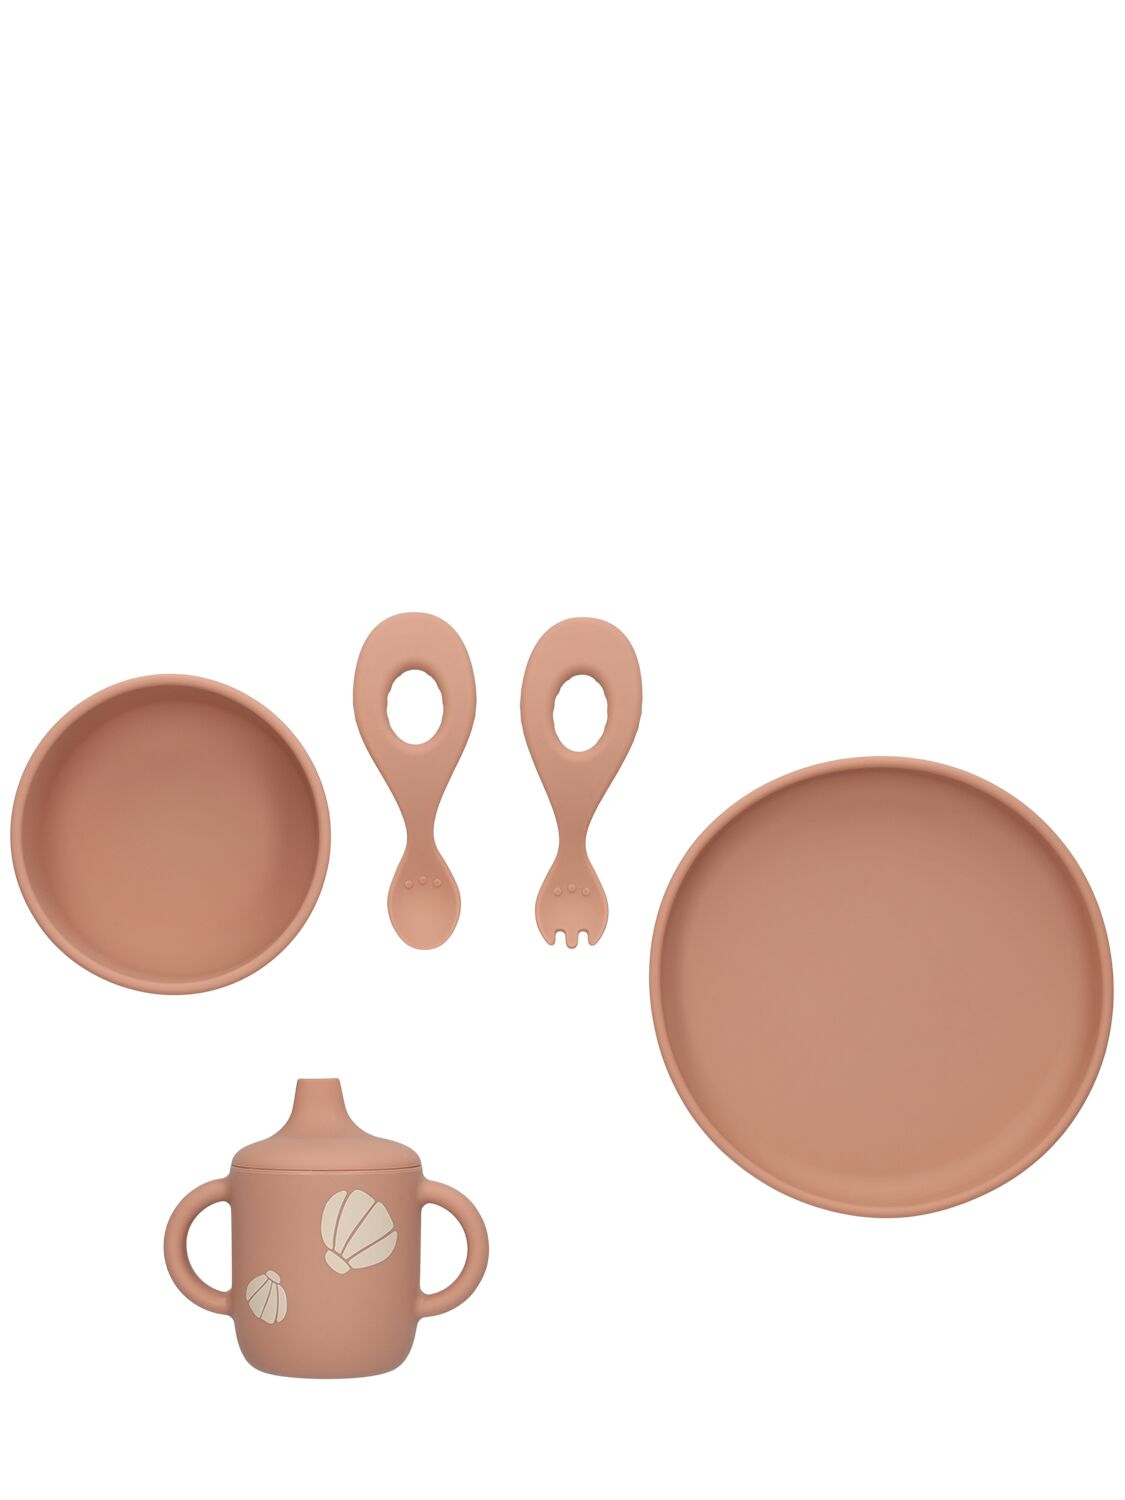 Image of Shell Print Silicone Tableware Set